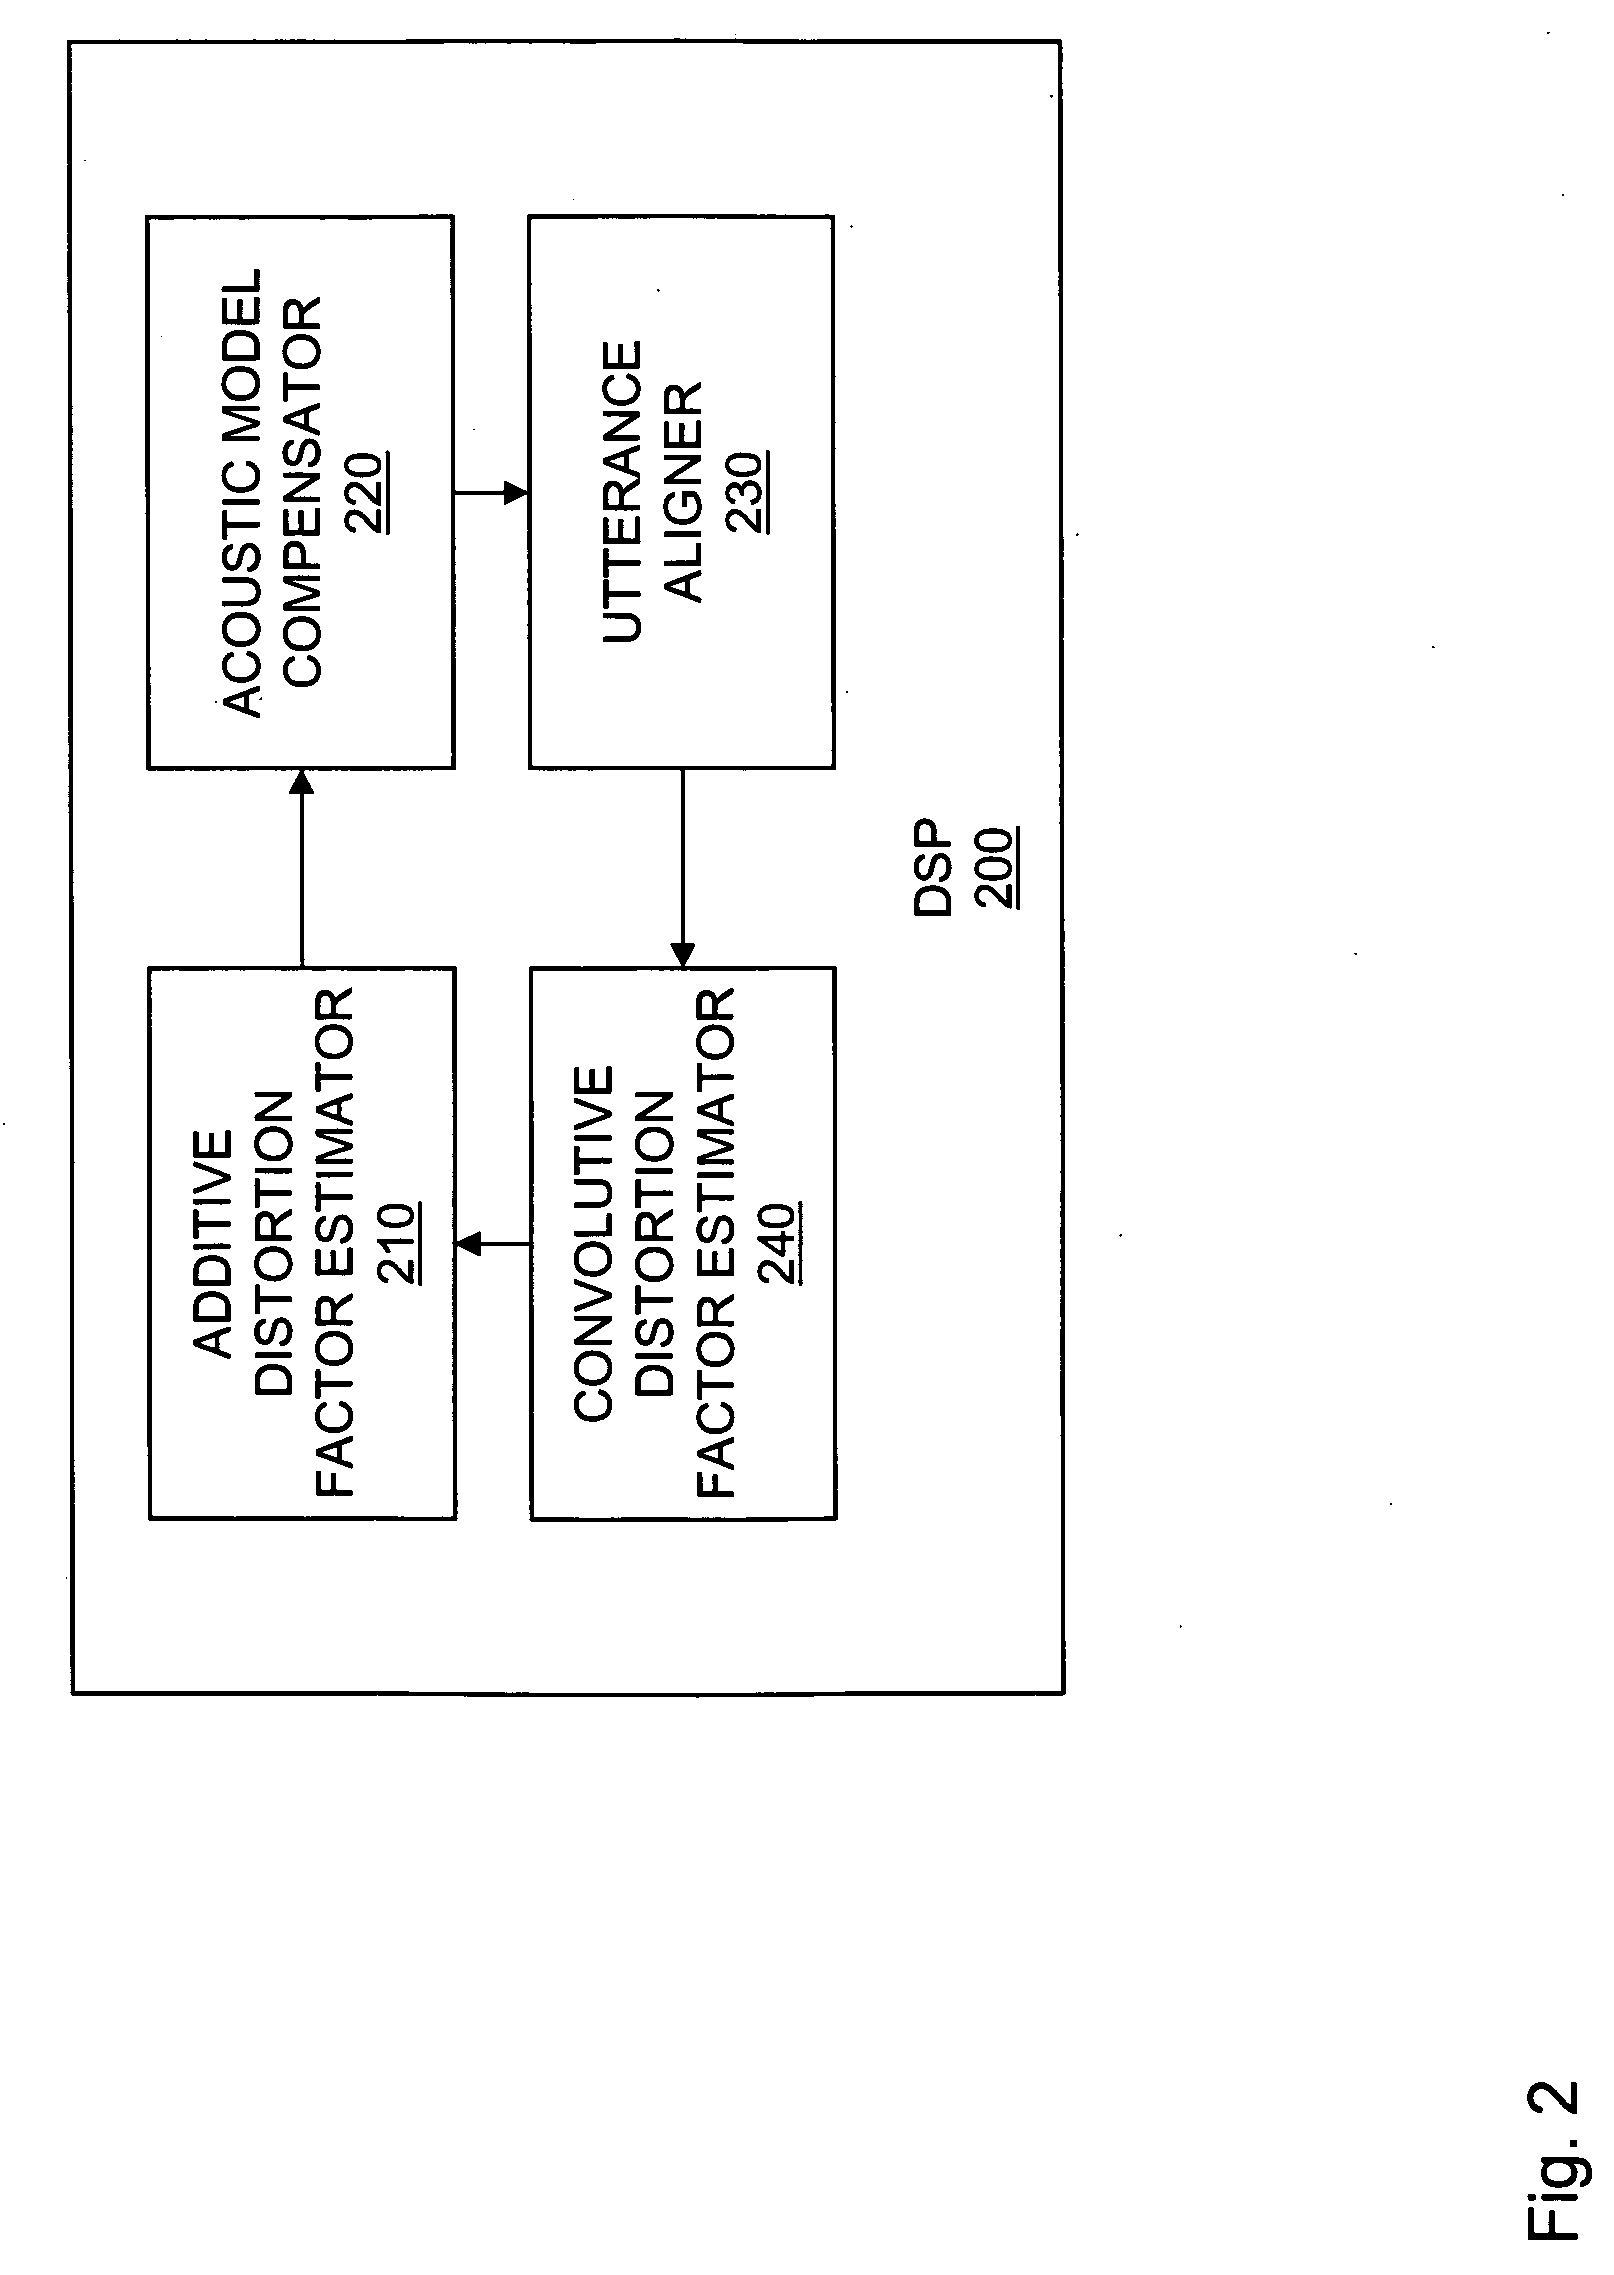 System and method for noisy automatic speech recognition employing joint compensation of additive and convolutive distortions